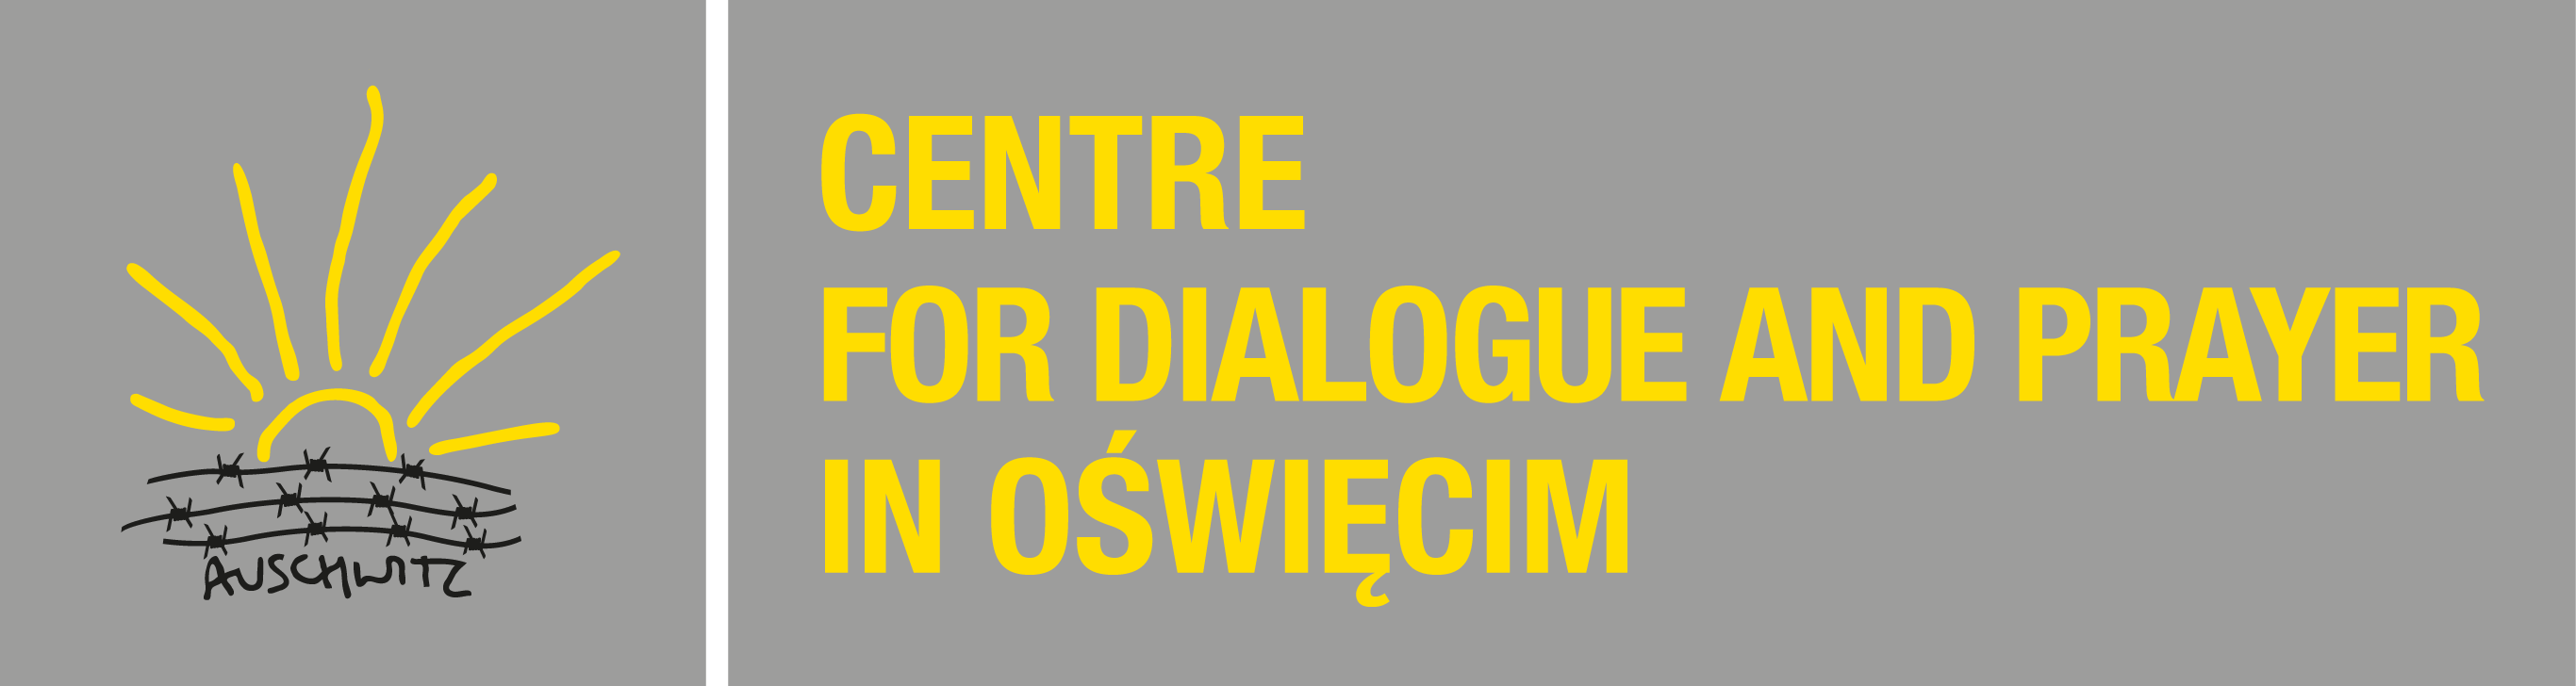 Centre for Dialogue and Prayer in Oswiecim